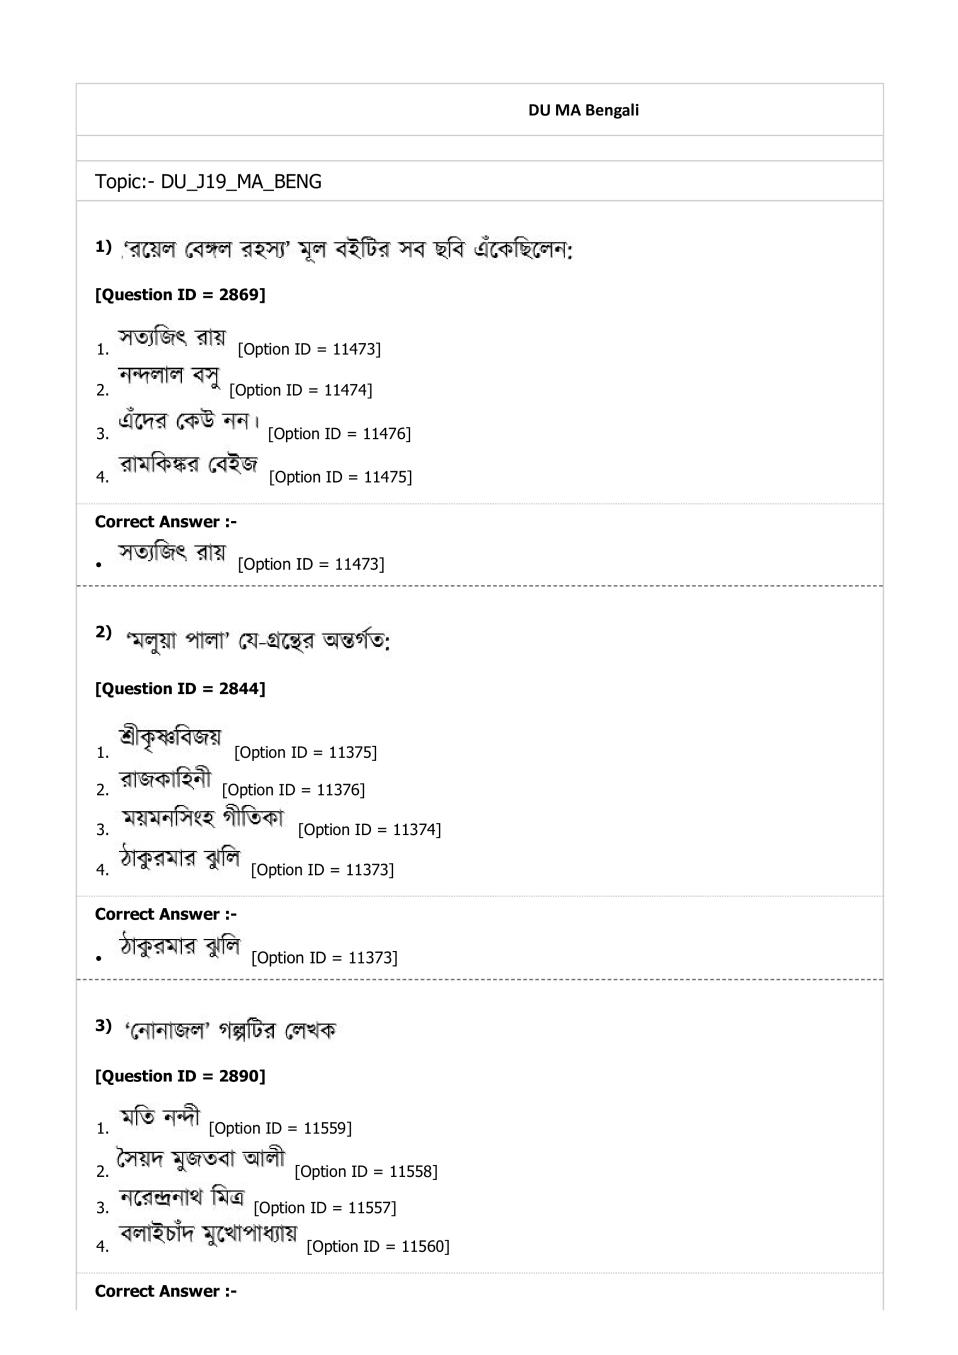 DUET Question Paper 2019 for MA Bengali - Page 1